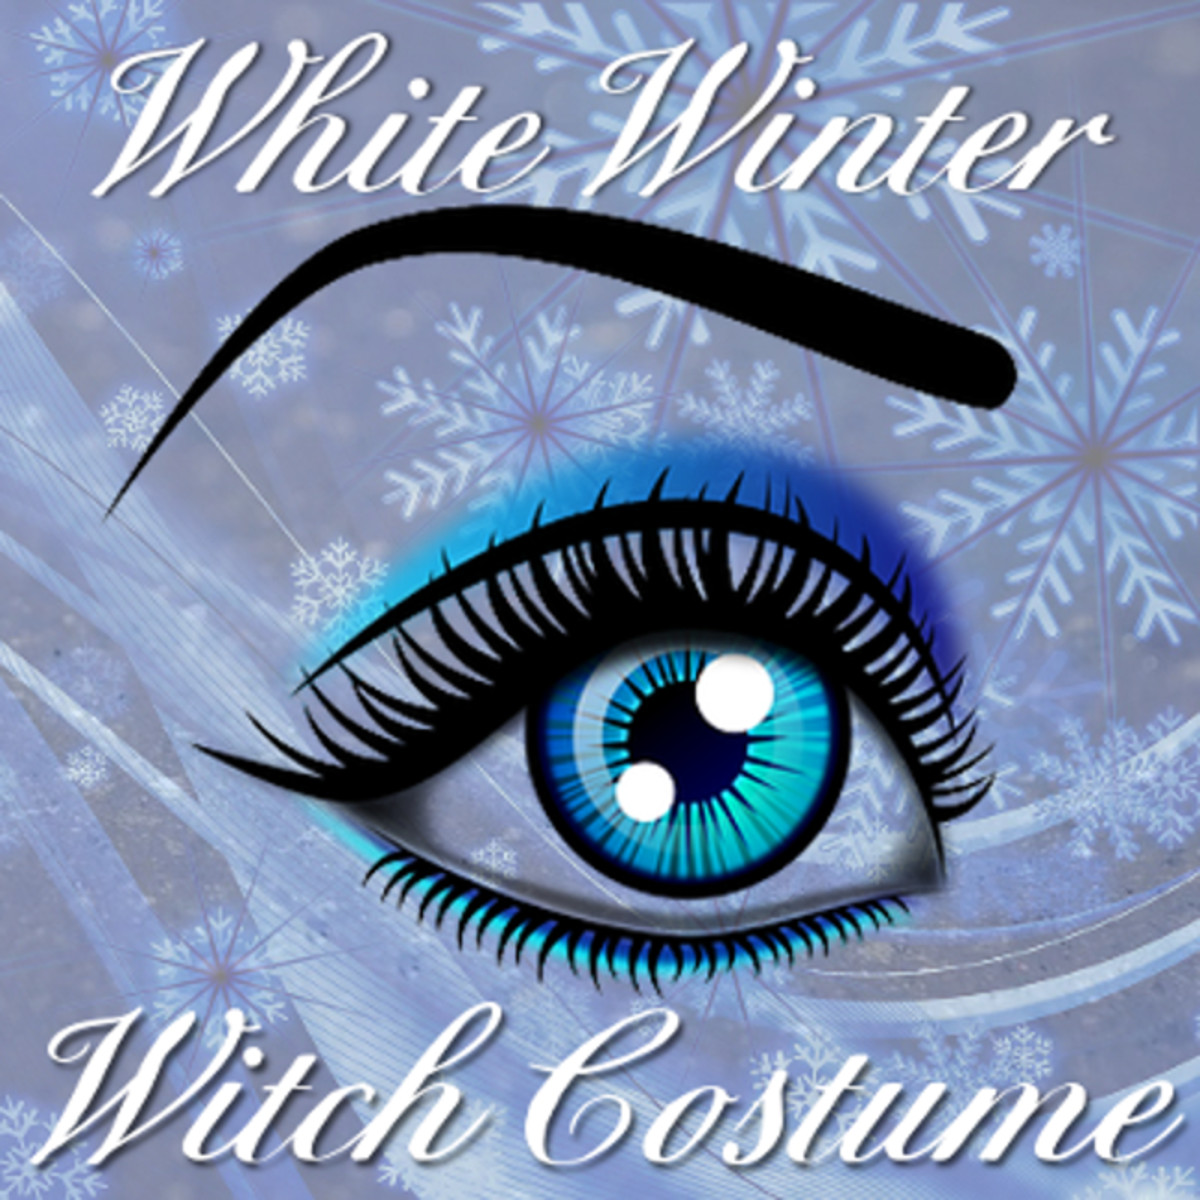 White winter witch costume and cosplay guide with lots of help from clothes, accessories and make-up.